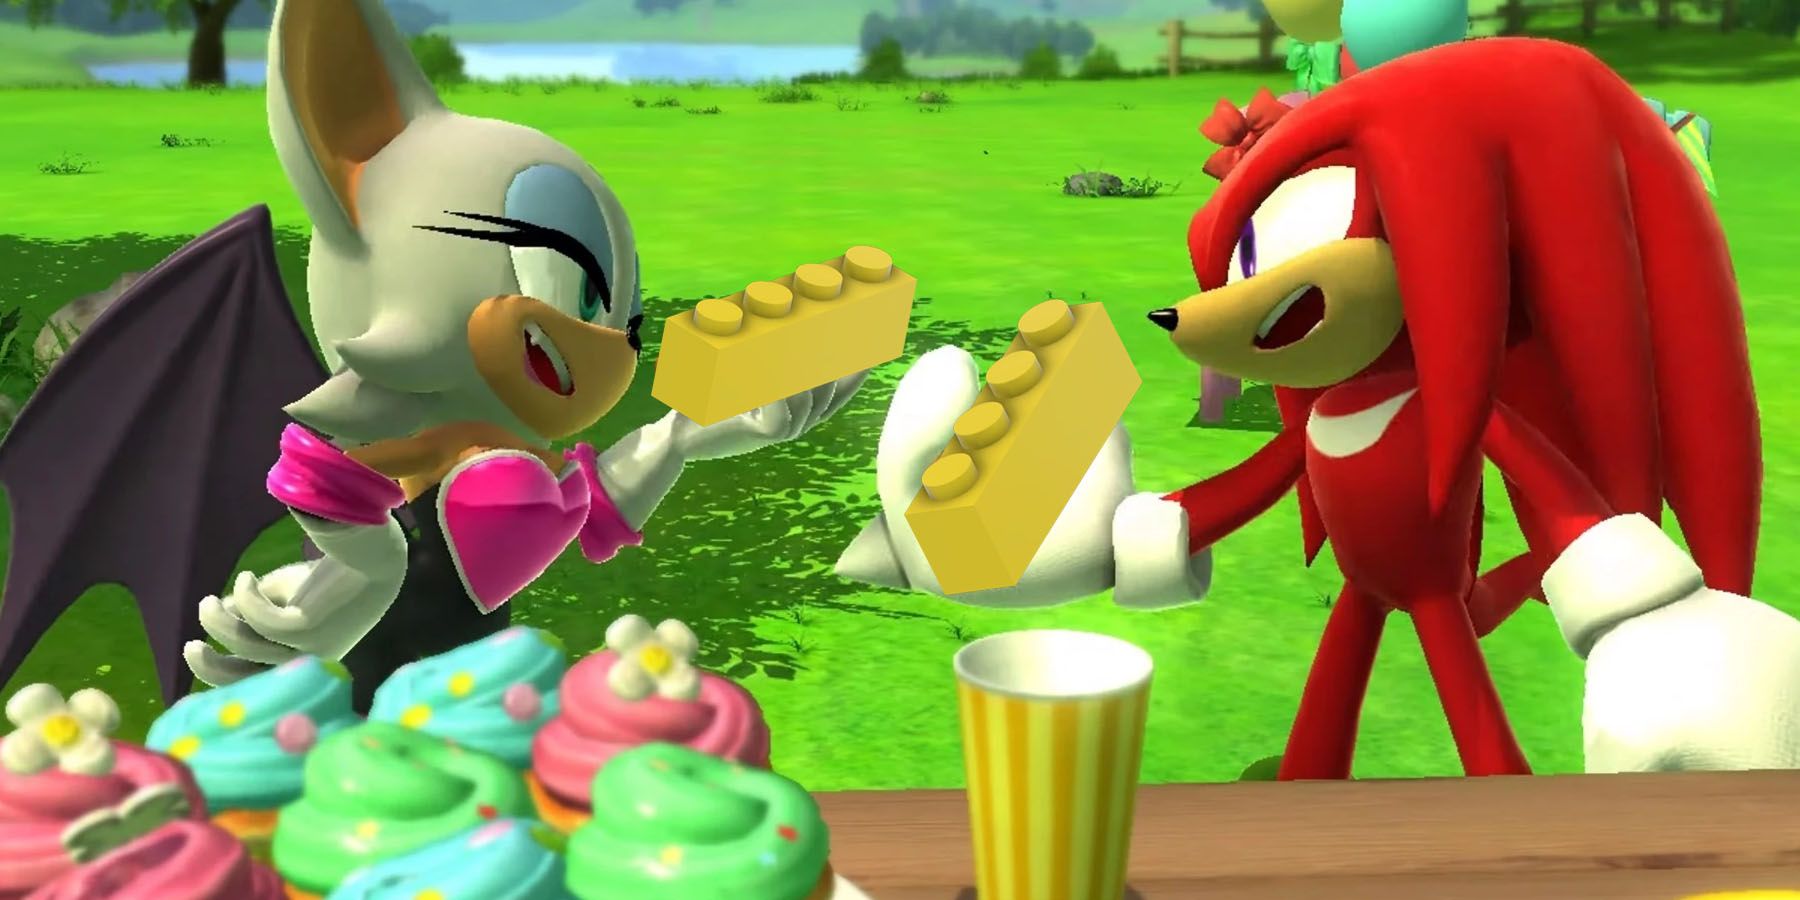 A screenshot of Knuckles the Echidna and Rouge the Bat holding yellow LEGO bricks in Sonic Generations.